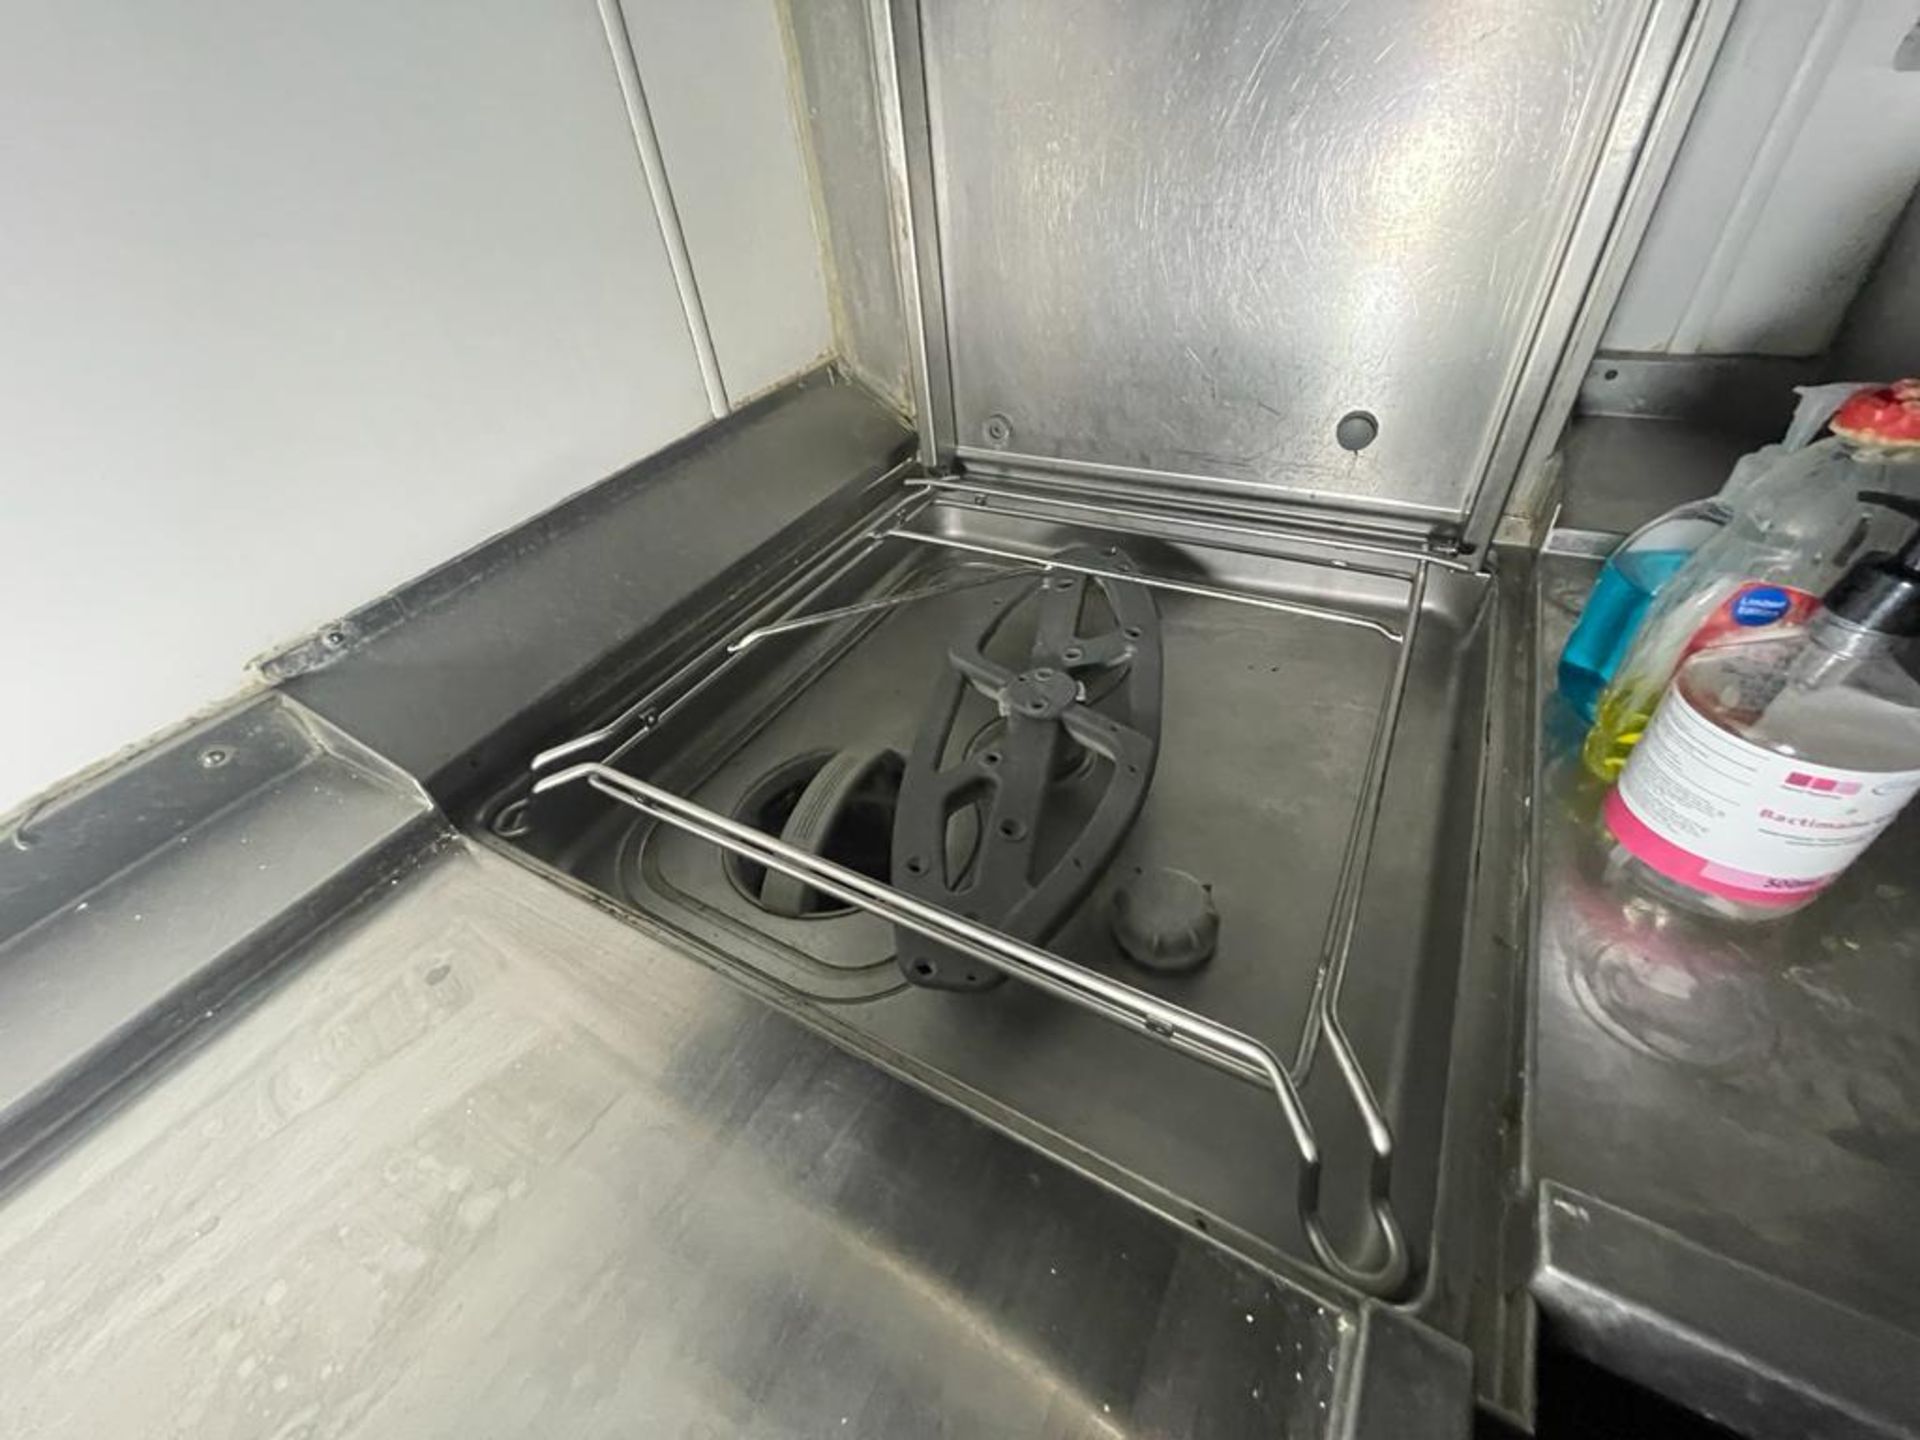 1 x Winterhalter PT-M Passthrough Dishwasher With Inlet and Outlet Table - Image 4 of 12